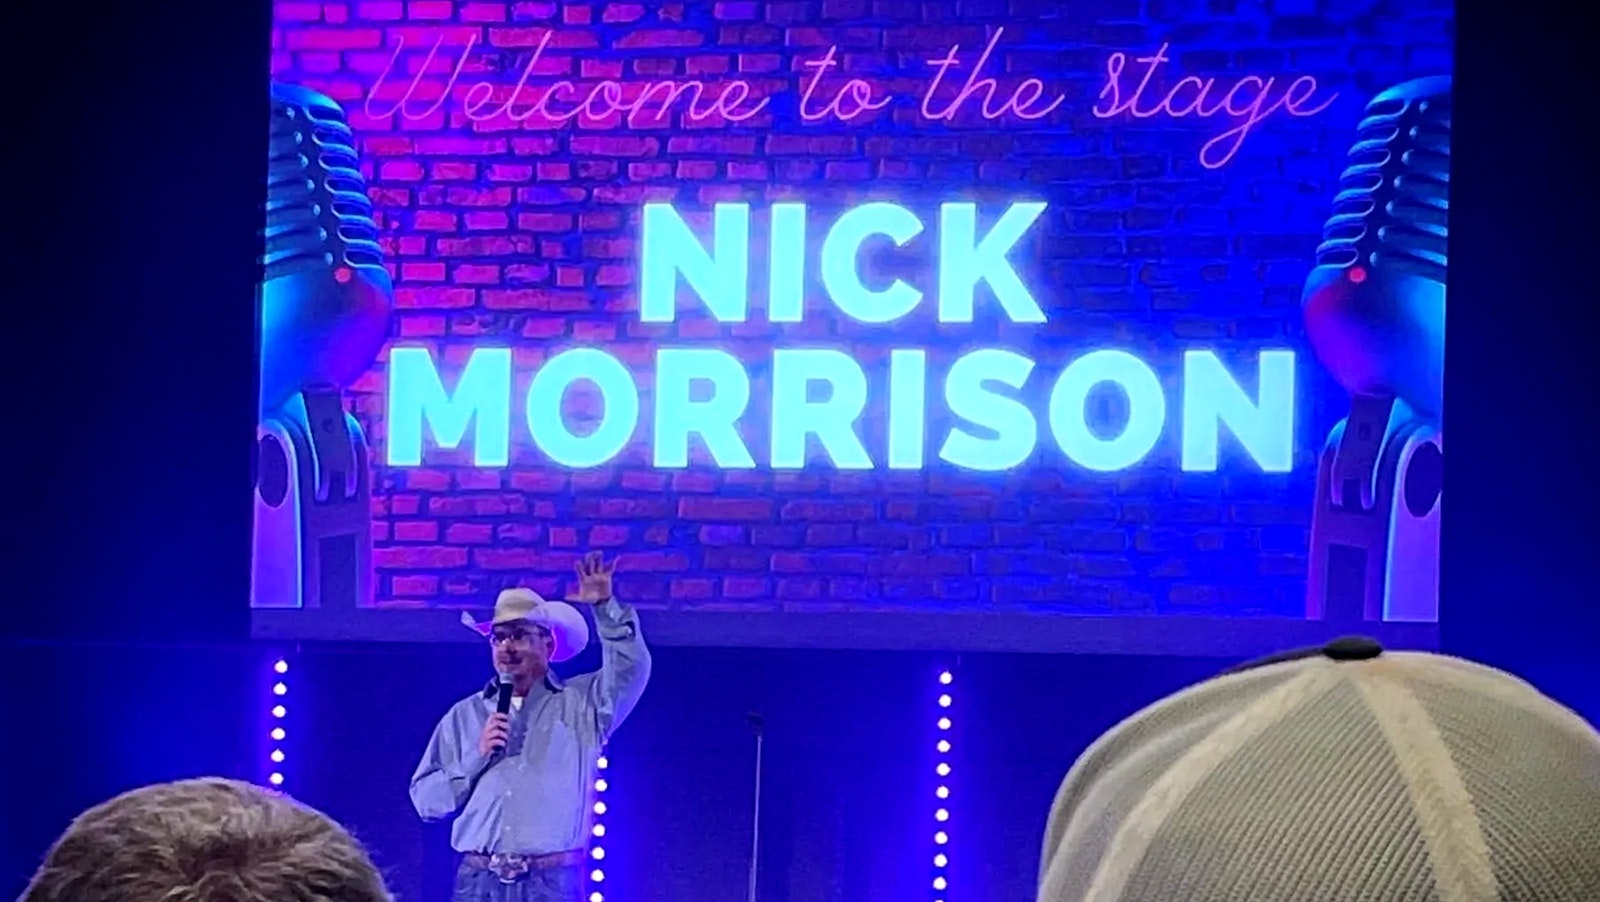 When his pro rodeo career ended almost as it began because of repeated injuries, Nick Morrison found another calling and is now an up-and-coming cowboy comedian.